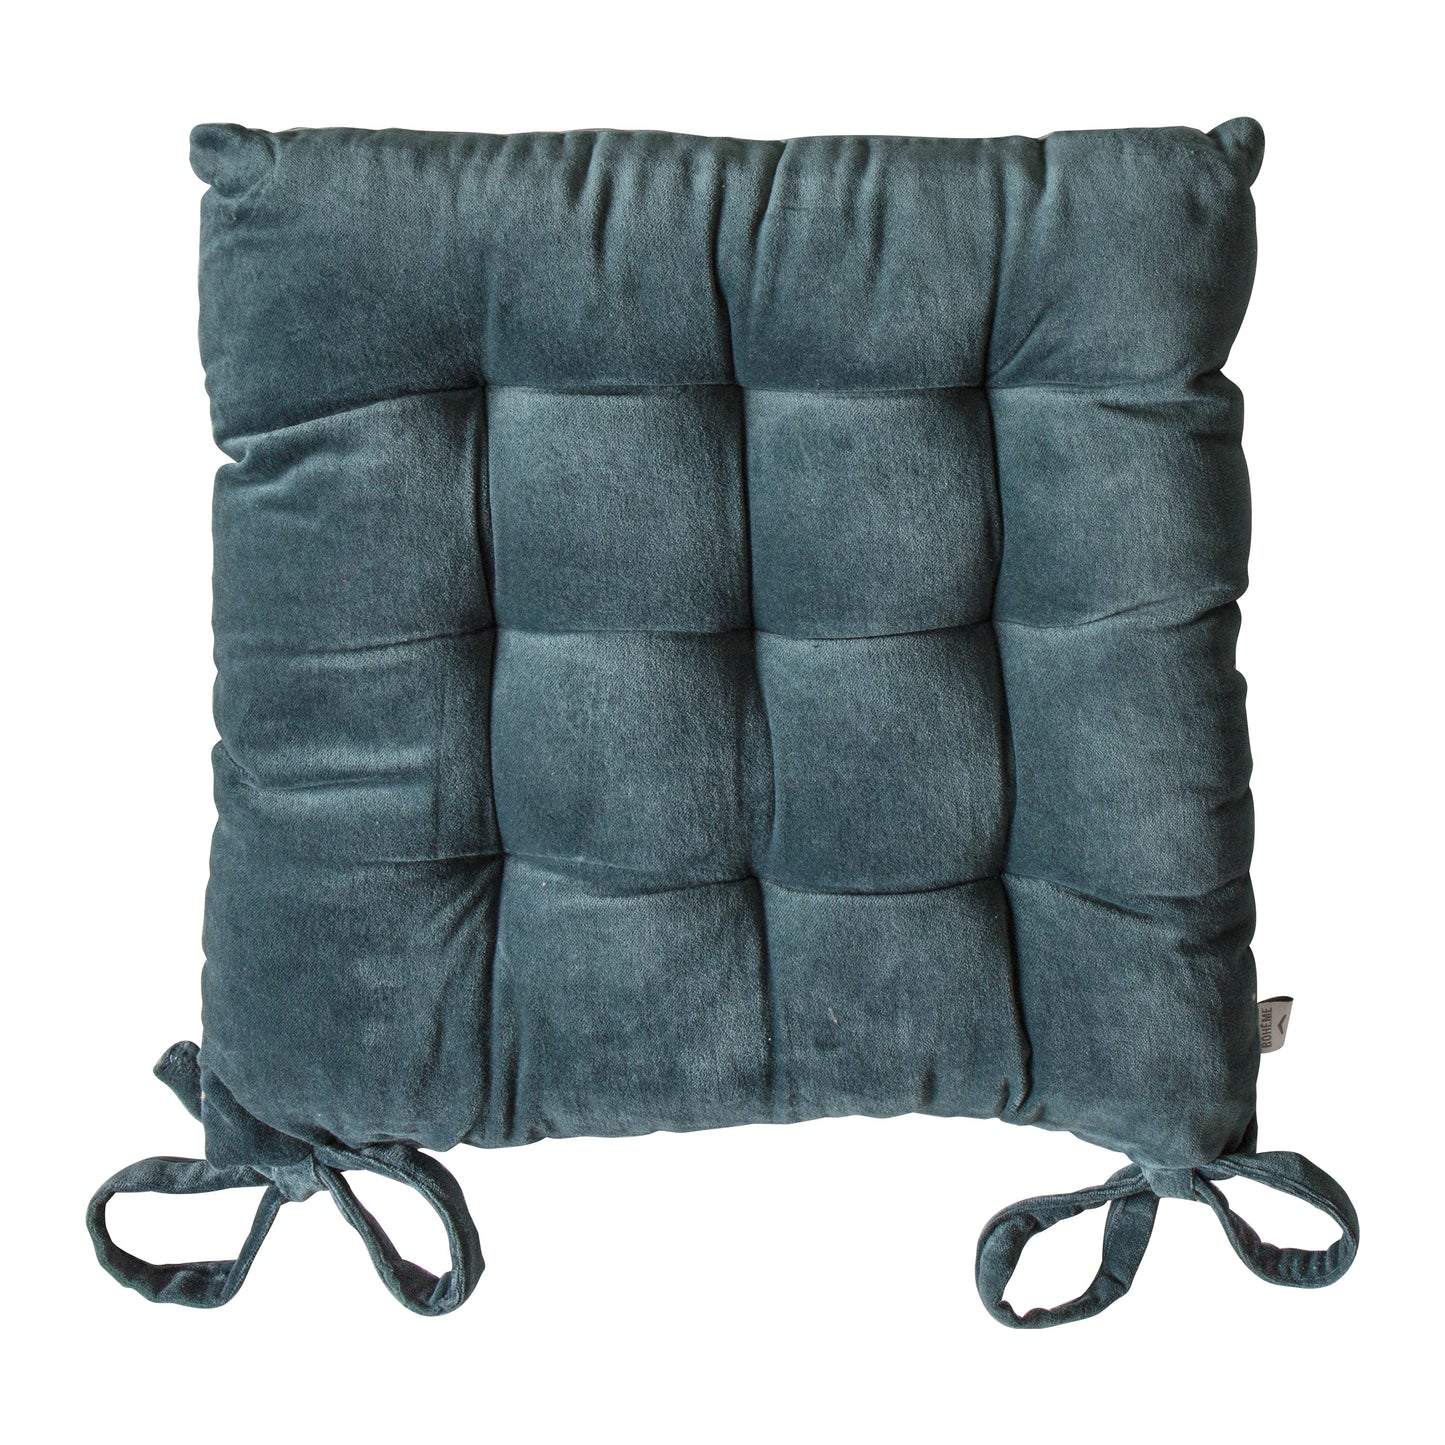 A Velvet Seatpad Navy 430x430mm cushion with ties for interior decor.